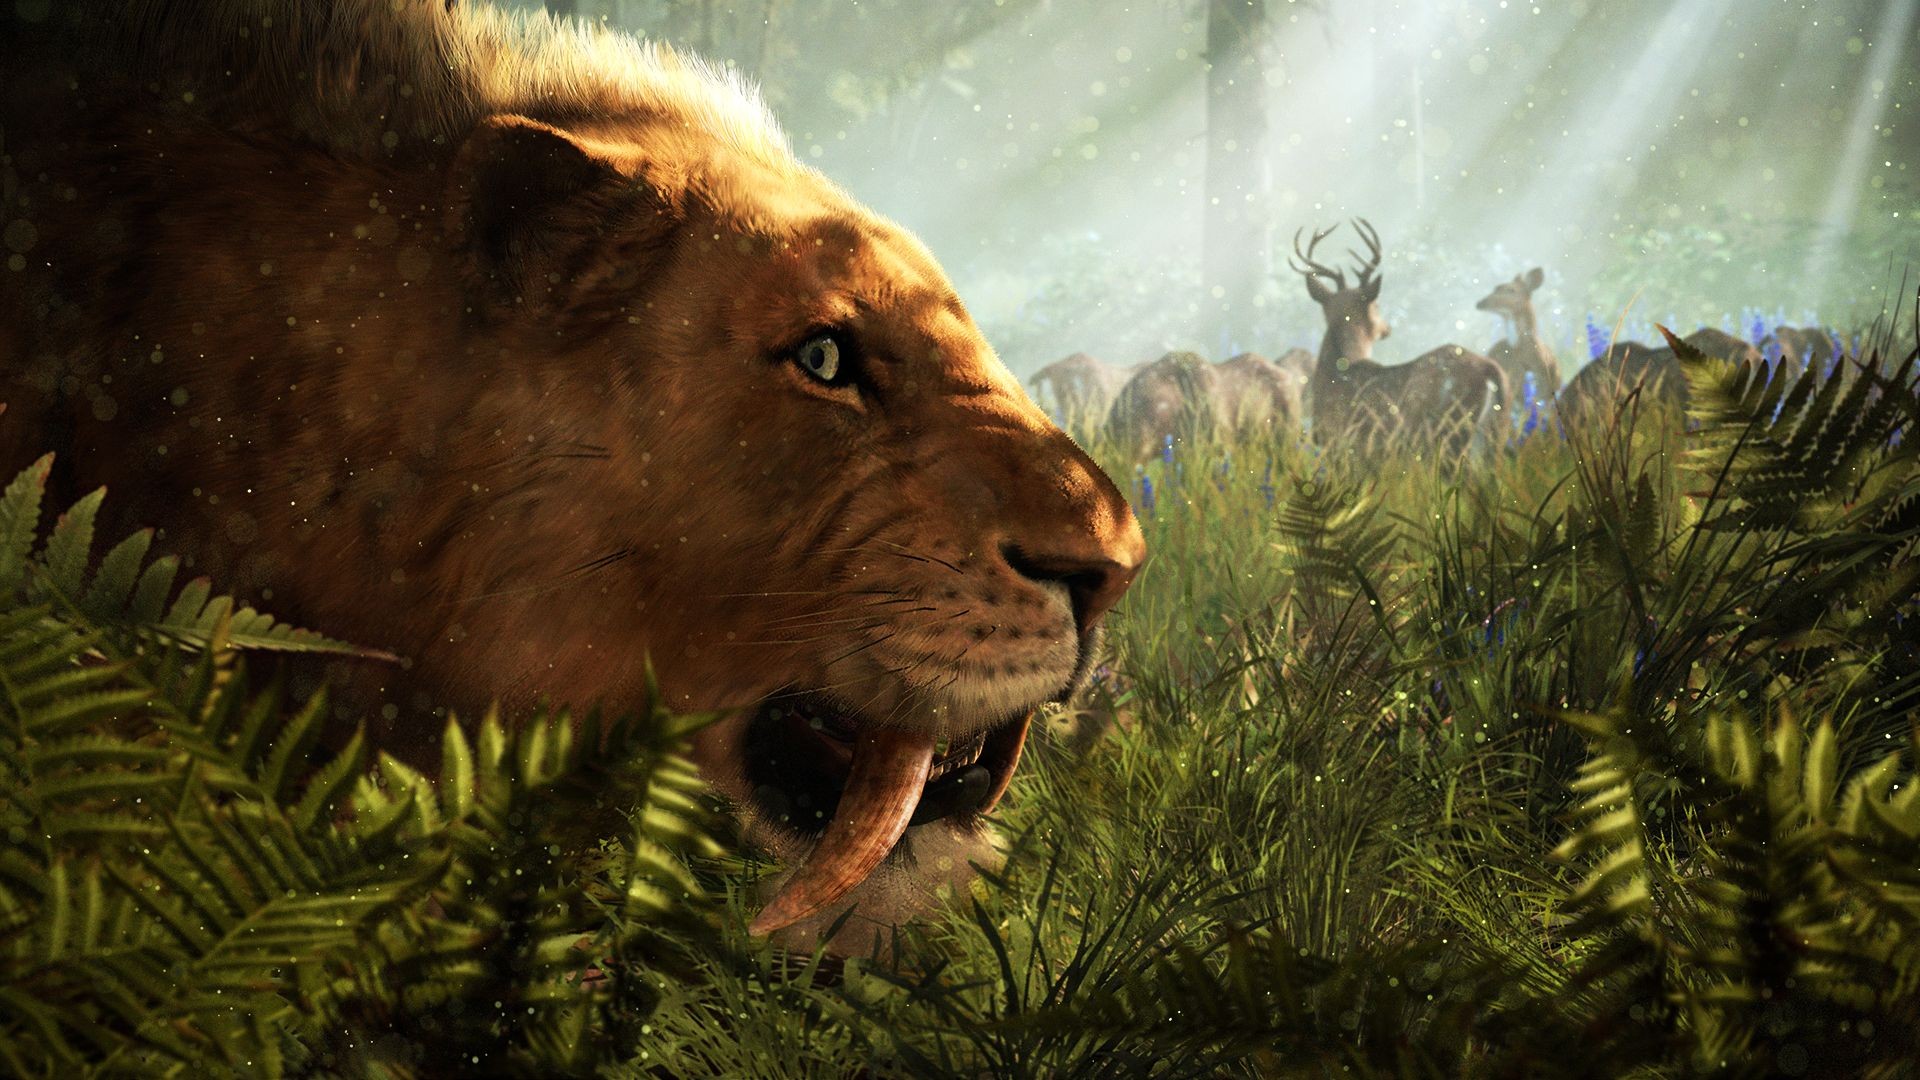 General 1920x1080 FarCry Primal  far cry primal video games animals 2016 (year) PC gaming big cats mammals Ubisoft